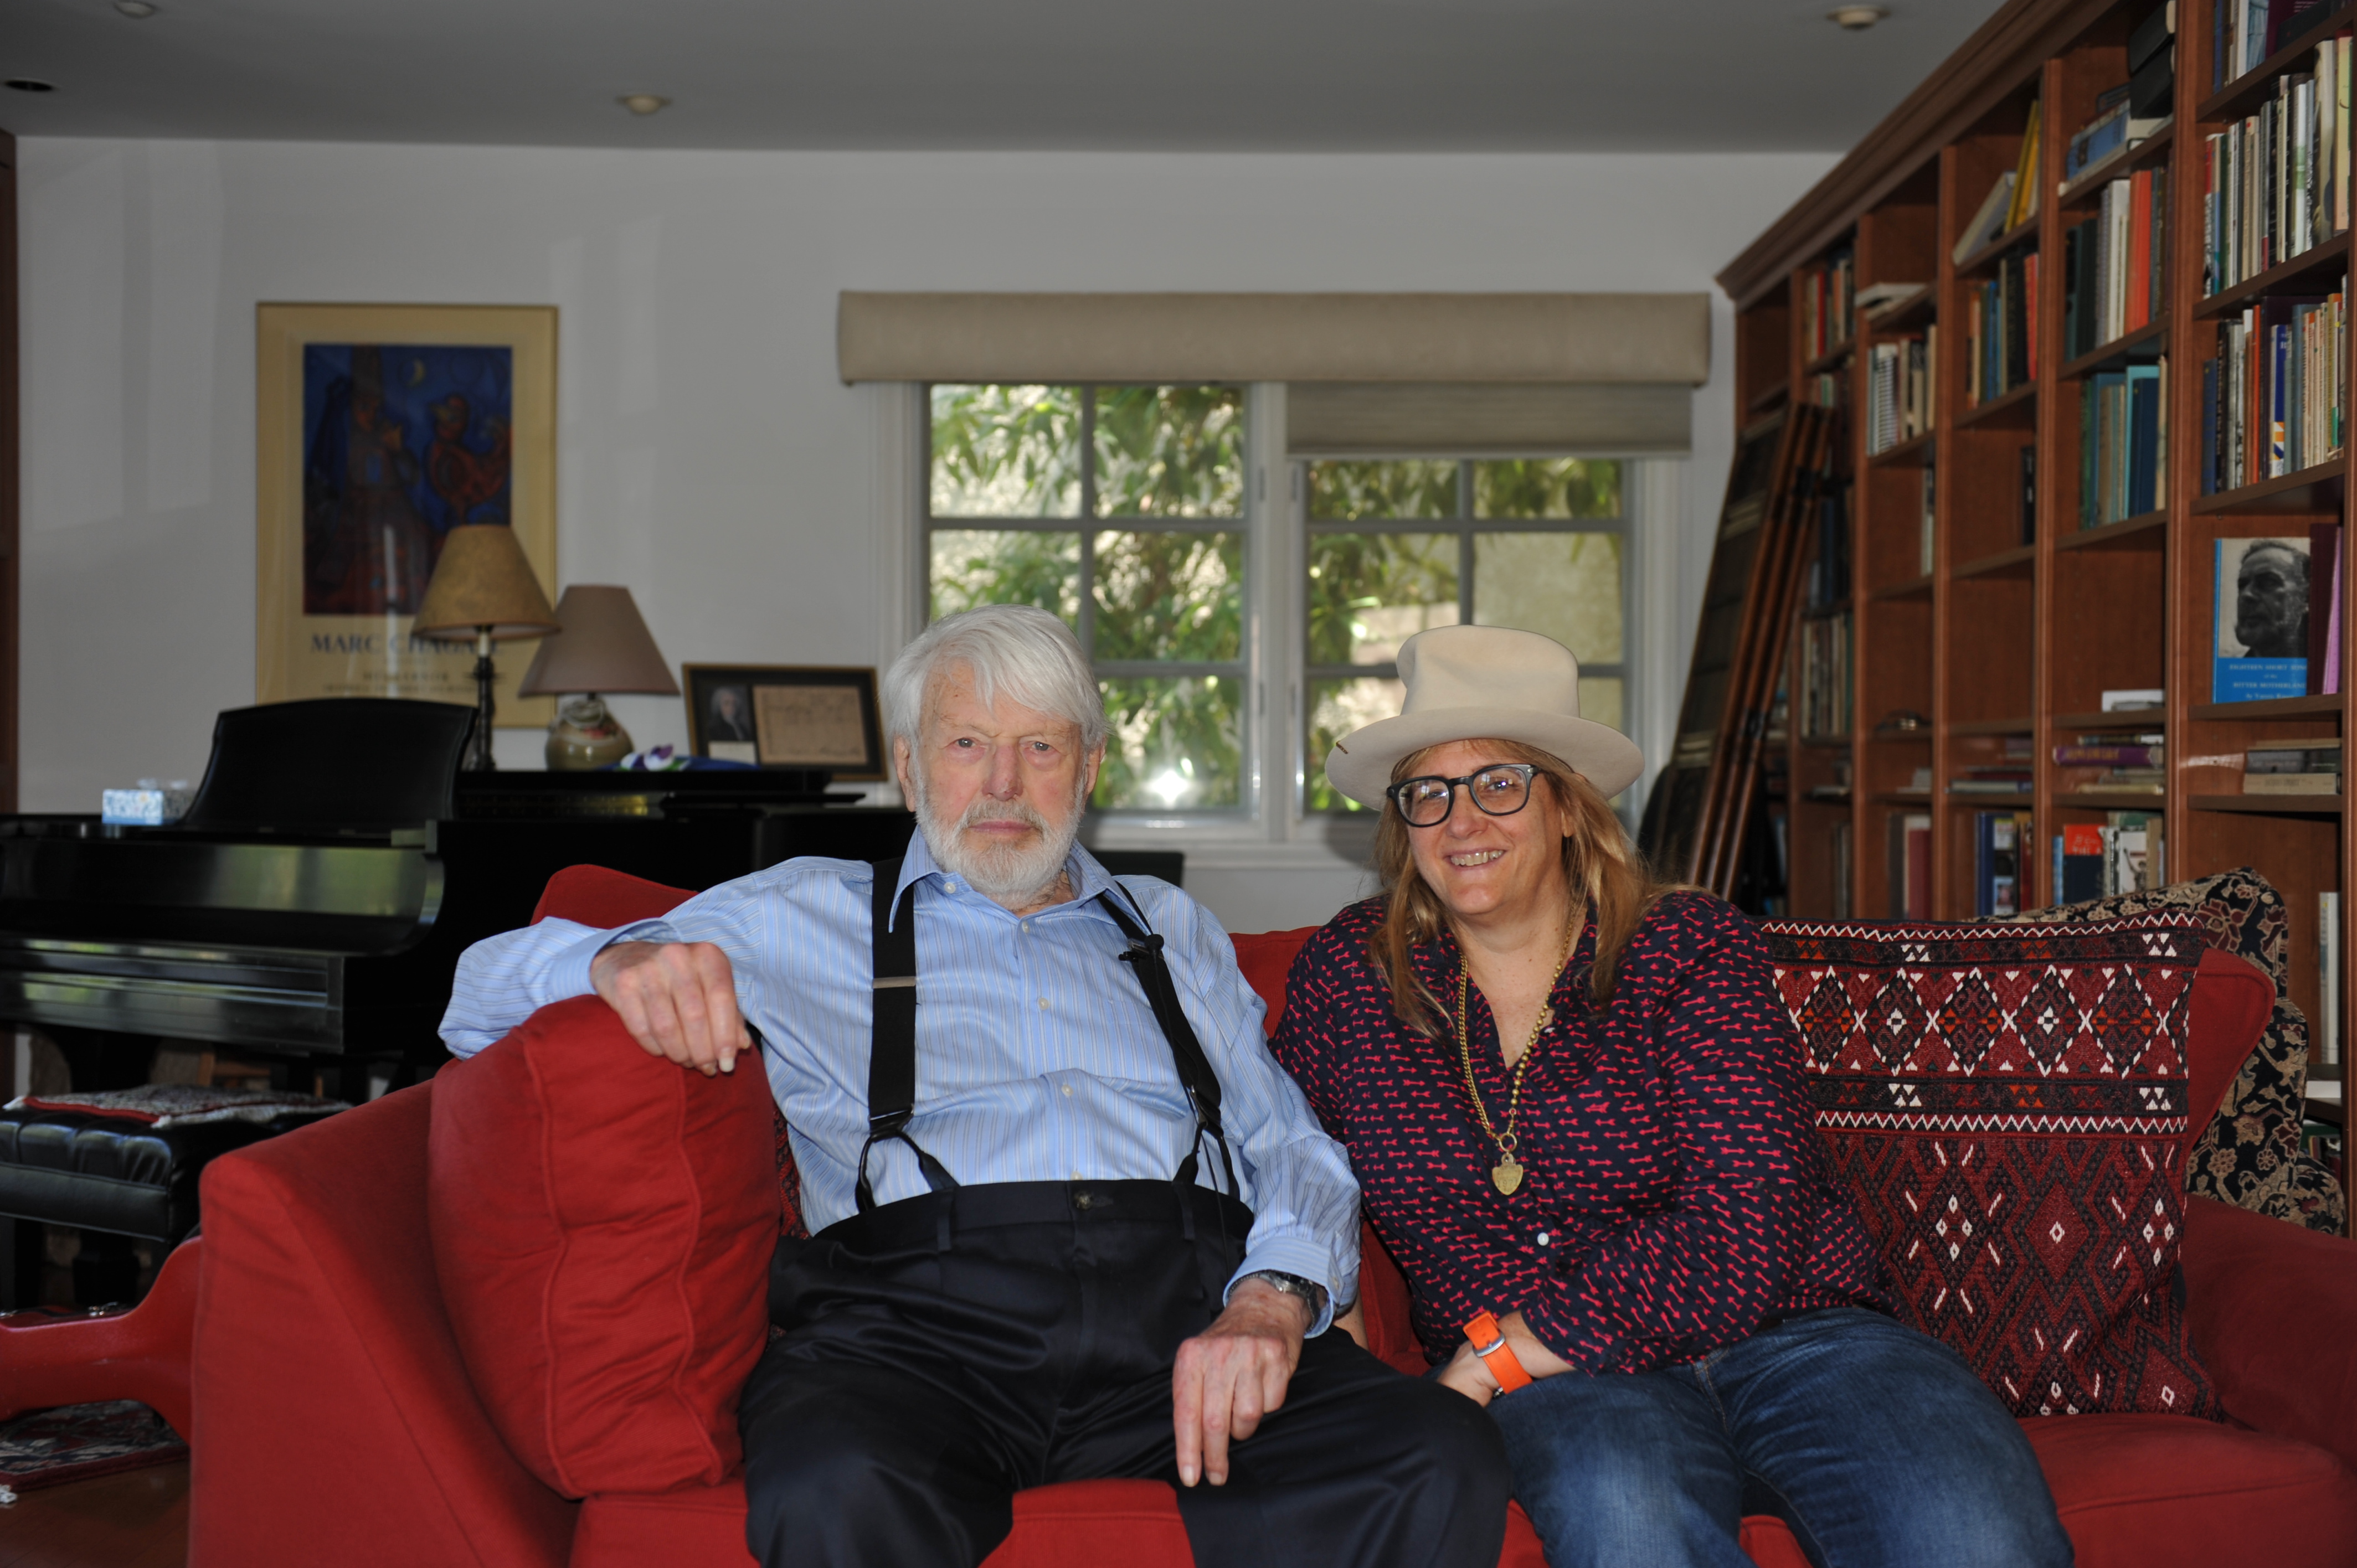 Actor/Activist/Folksinger Theodore Bikel & director/producer Michele Noble at Bikel's home filming acceptance speech for RIIFF Lifetime Achievement Award